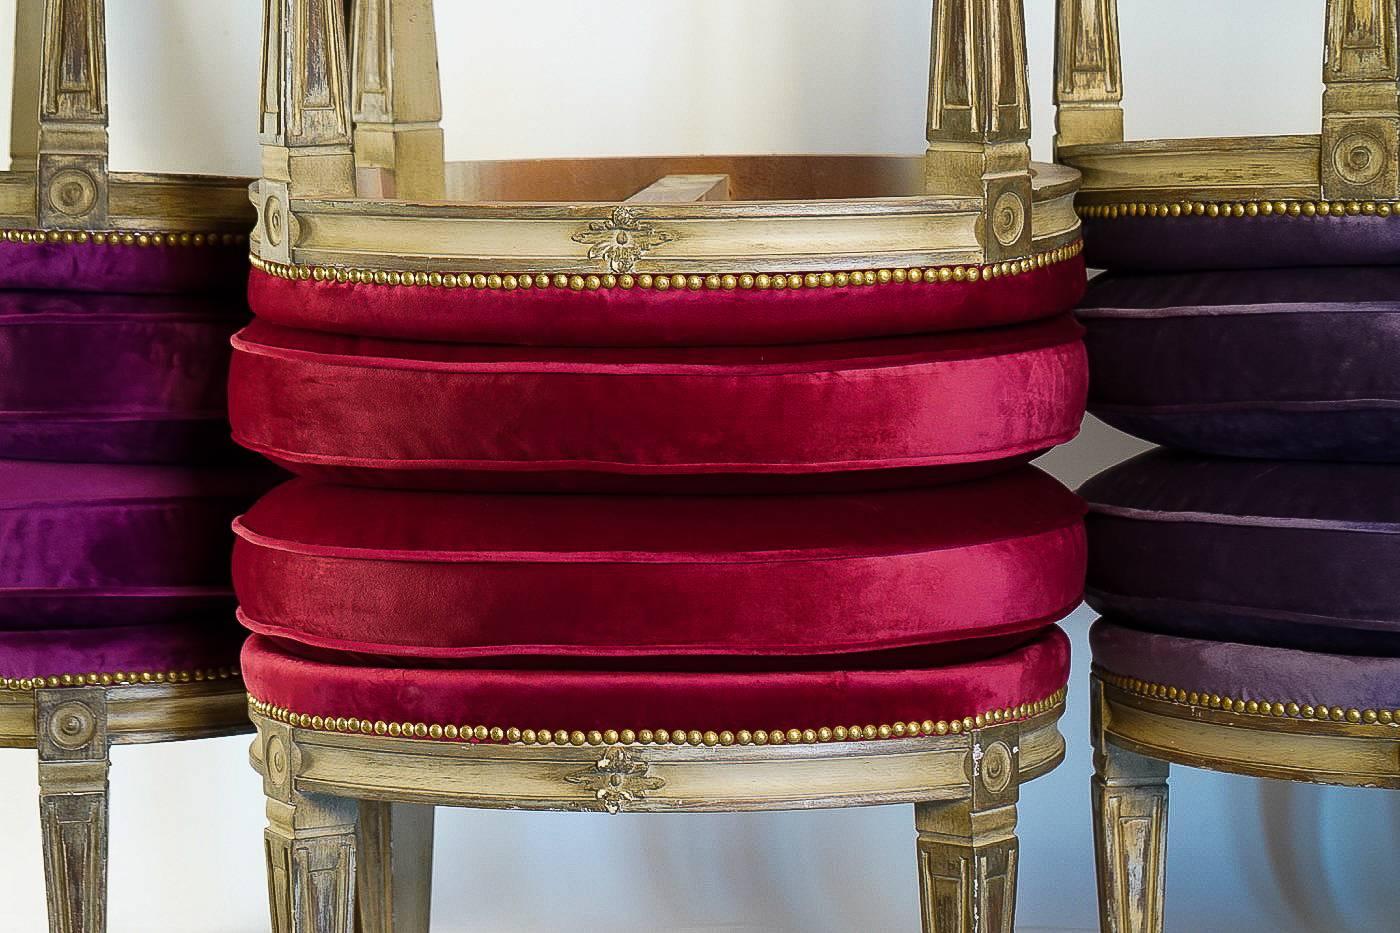 We have the pleasure to present you a beautiful set of four stools hand-carved and hand-painted fruitwood. 

Elegance, a fine quality in these set of six Italian stools manufactured close to the city of Turin, in the classic Louis XVI style.
Covered